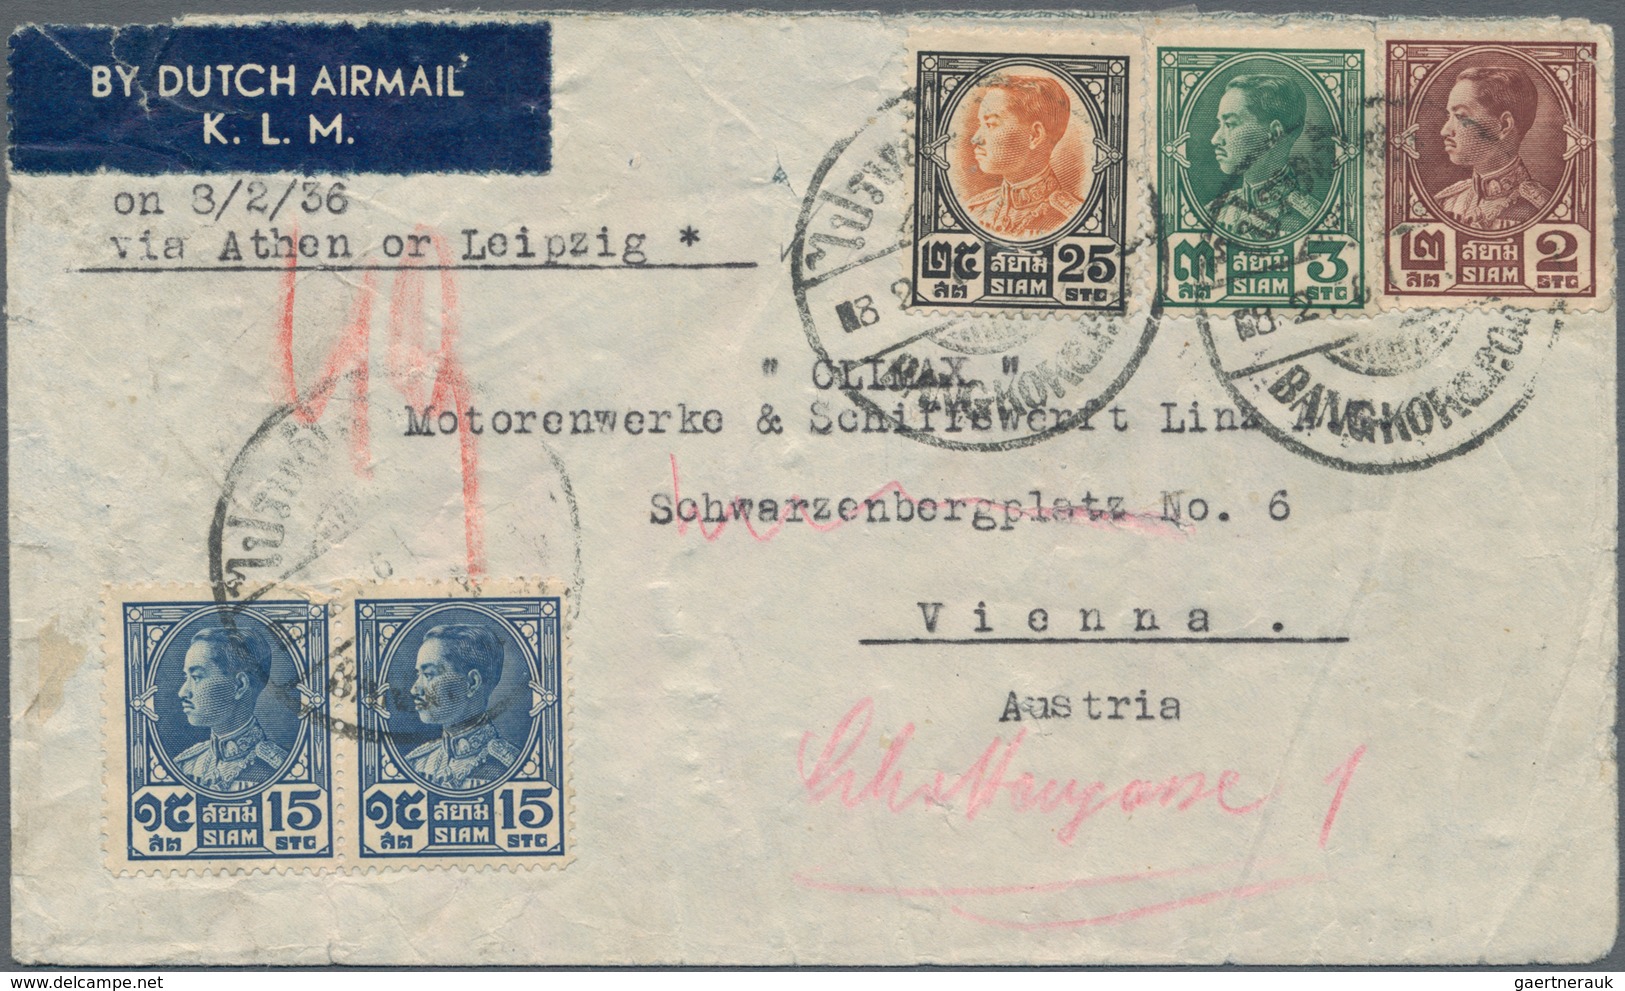 Thailand: 1928/54, Airmail Covers (4) To Overseas Inc. 1936 60 S. Frank (2s Small Tear) Tied "Bangko - Thailand